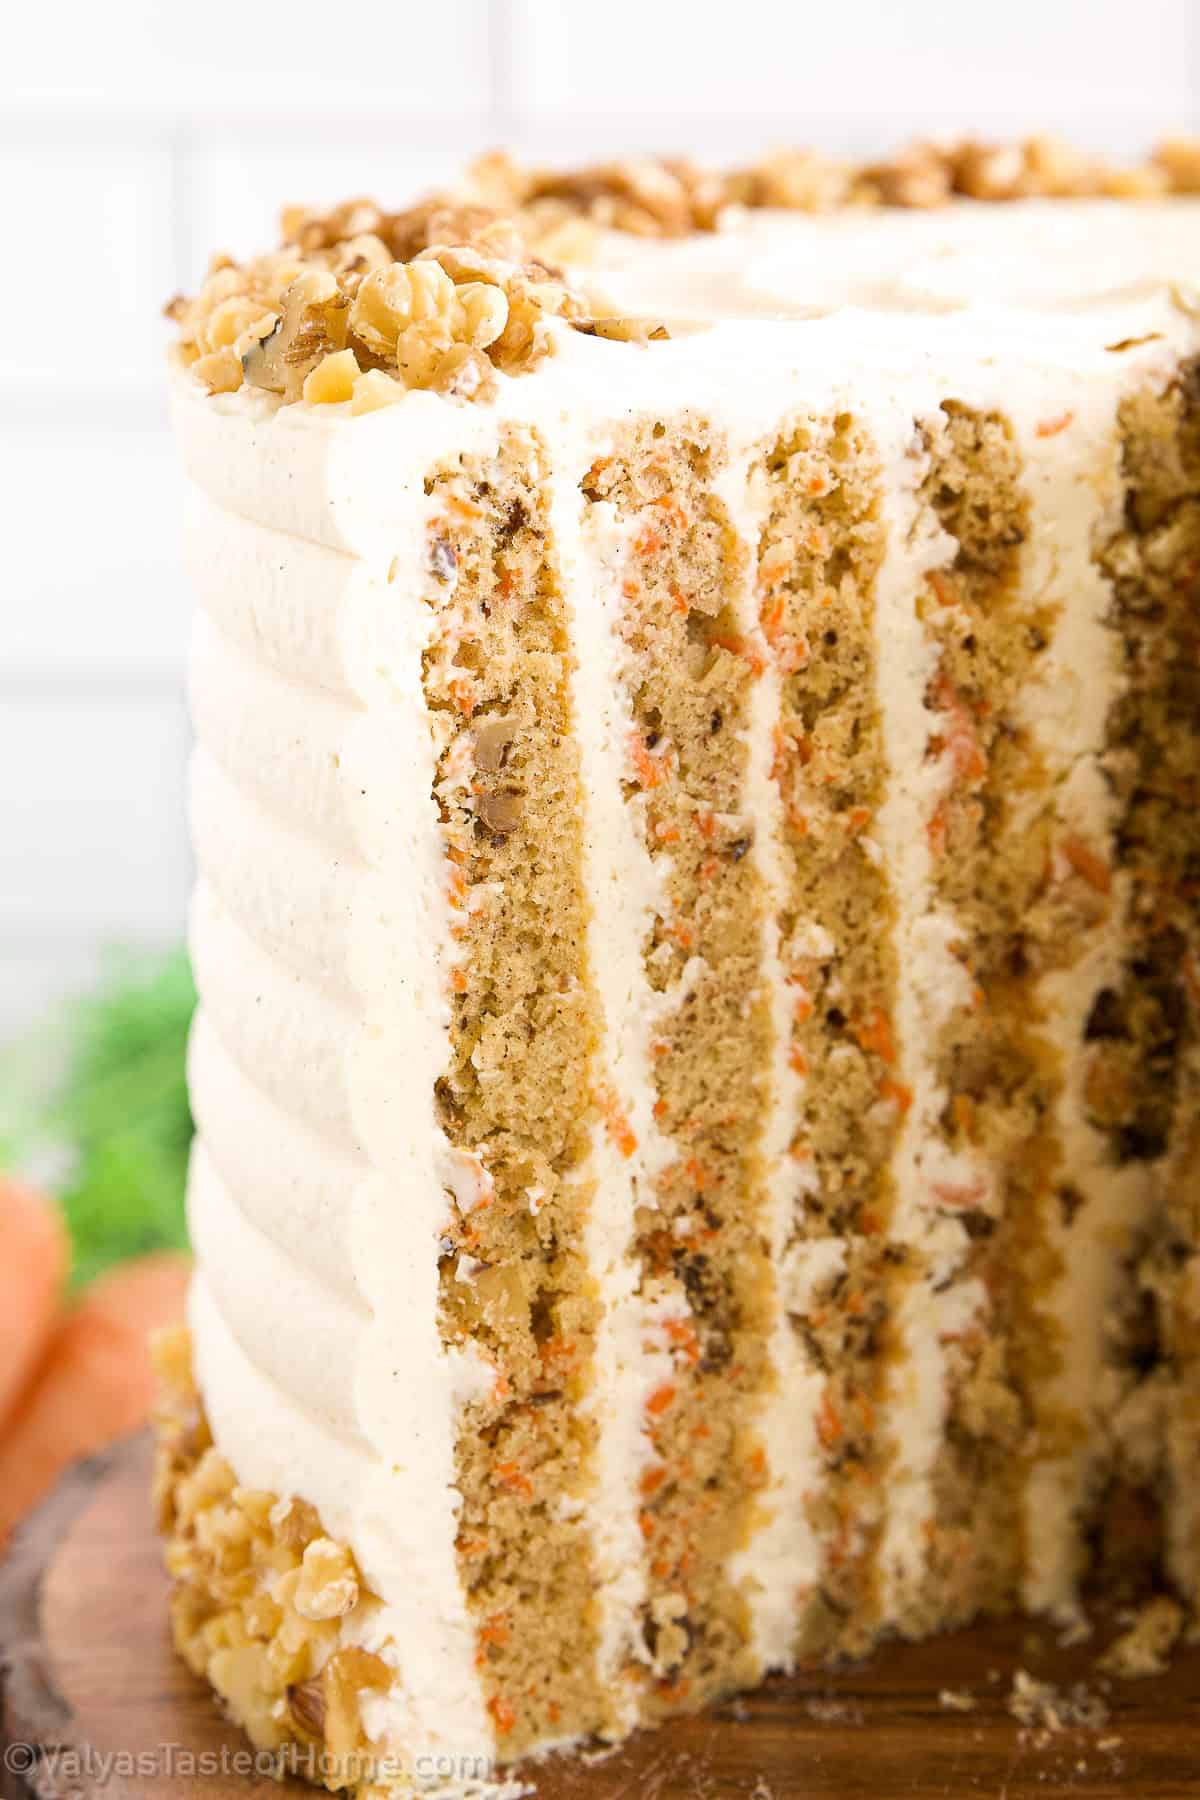 Are you looking for a simple, but gorgeous and delicious cake recipe to make for any holiday, birthday, or any special occasion? Look no further, you found it here! 